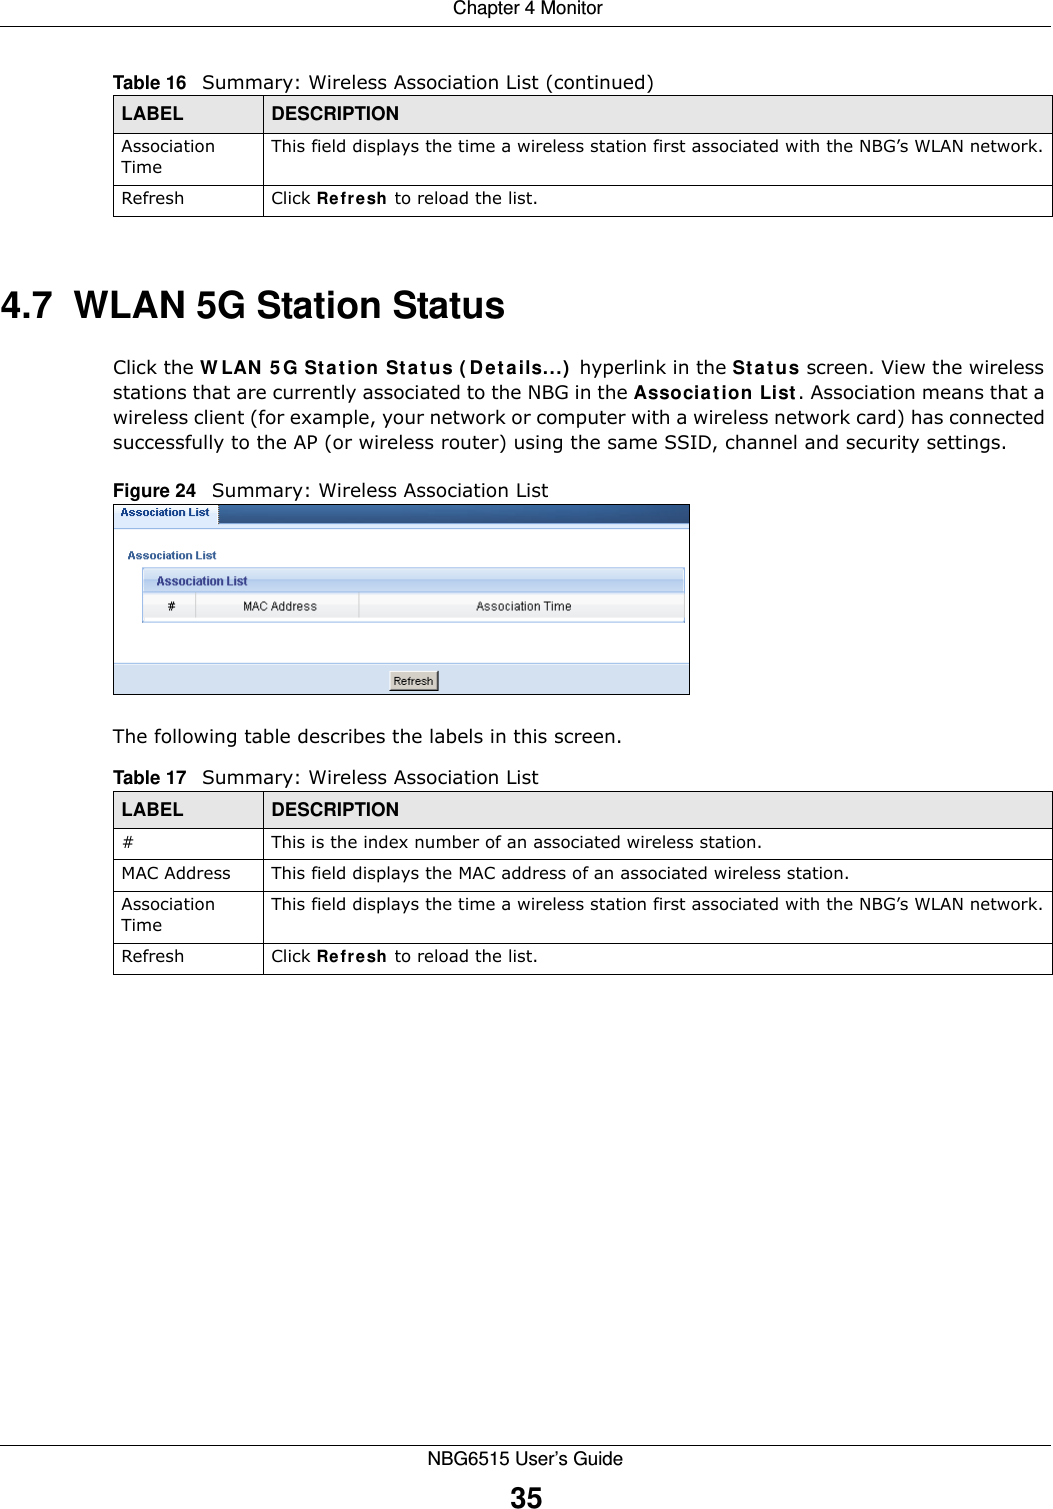  Chapter 4 MonitorNBG6515 User’s Guide354.7  WLAN 5G Station Status     Click the WLAN 5G Station Status (Details...) hyperlink in the Status screen. View the wireless stations that are currently associated to the NBG in the Association List. Association means that a wireless client (for example, your network or computer with a wireless network card) has connected successfully to the AP (or wireless router) using the same SSID, channel and security settings.Figure 24   Summary: Wireless Association ListThe following table describes the labels in this screen.Association TimeThis field displays the time a wireless station first associated with the NBG’s WLAN network.Refresh Click Refresh to reload the list. Table 16   Summary: Wireless Association List (continued)LABEL DESCRIPTIONTable 17   Summary: Wireless Association ListLABEL DESCRIPTION#  This is the index number of an associated wireless station. MAC Address  This field displays the MAC address of an associated wireless station.Association TimeThis field displays the time a wireless station first associated with the NBG’s WLAN network.Refresh Click Refresh to reload the list.  